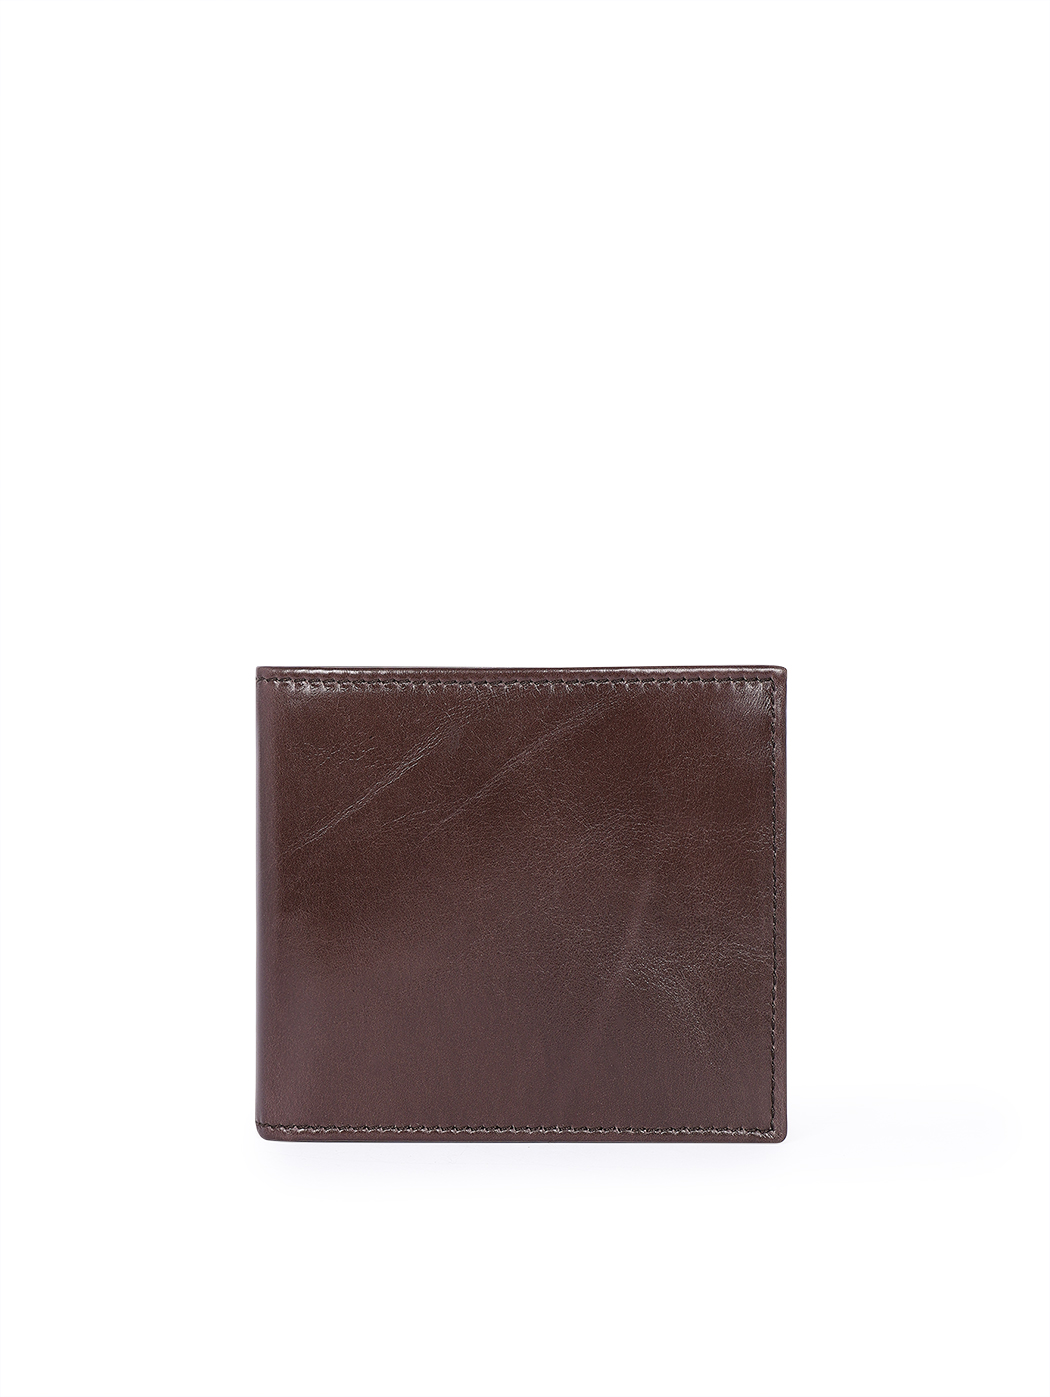 Pebble Leather Billfold Coin Pocket Wallet Brown